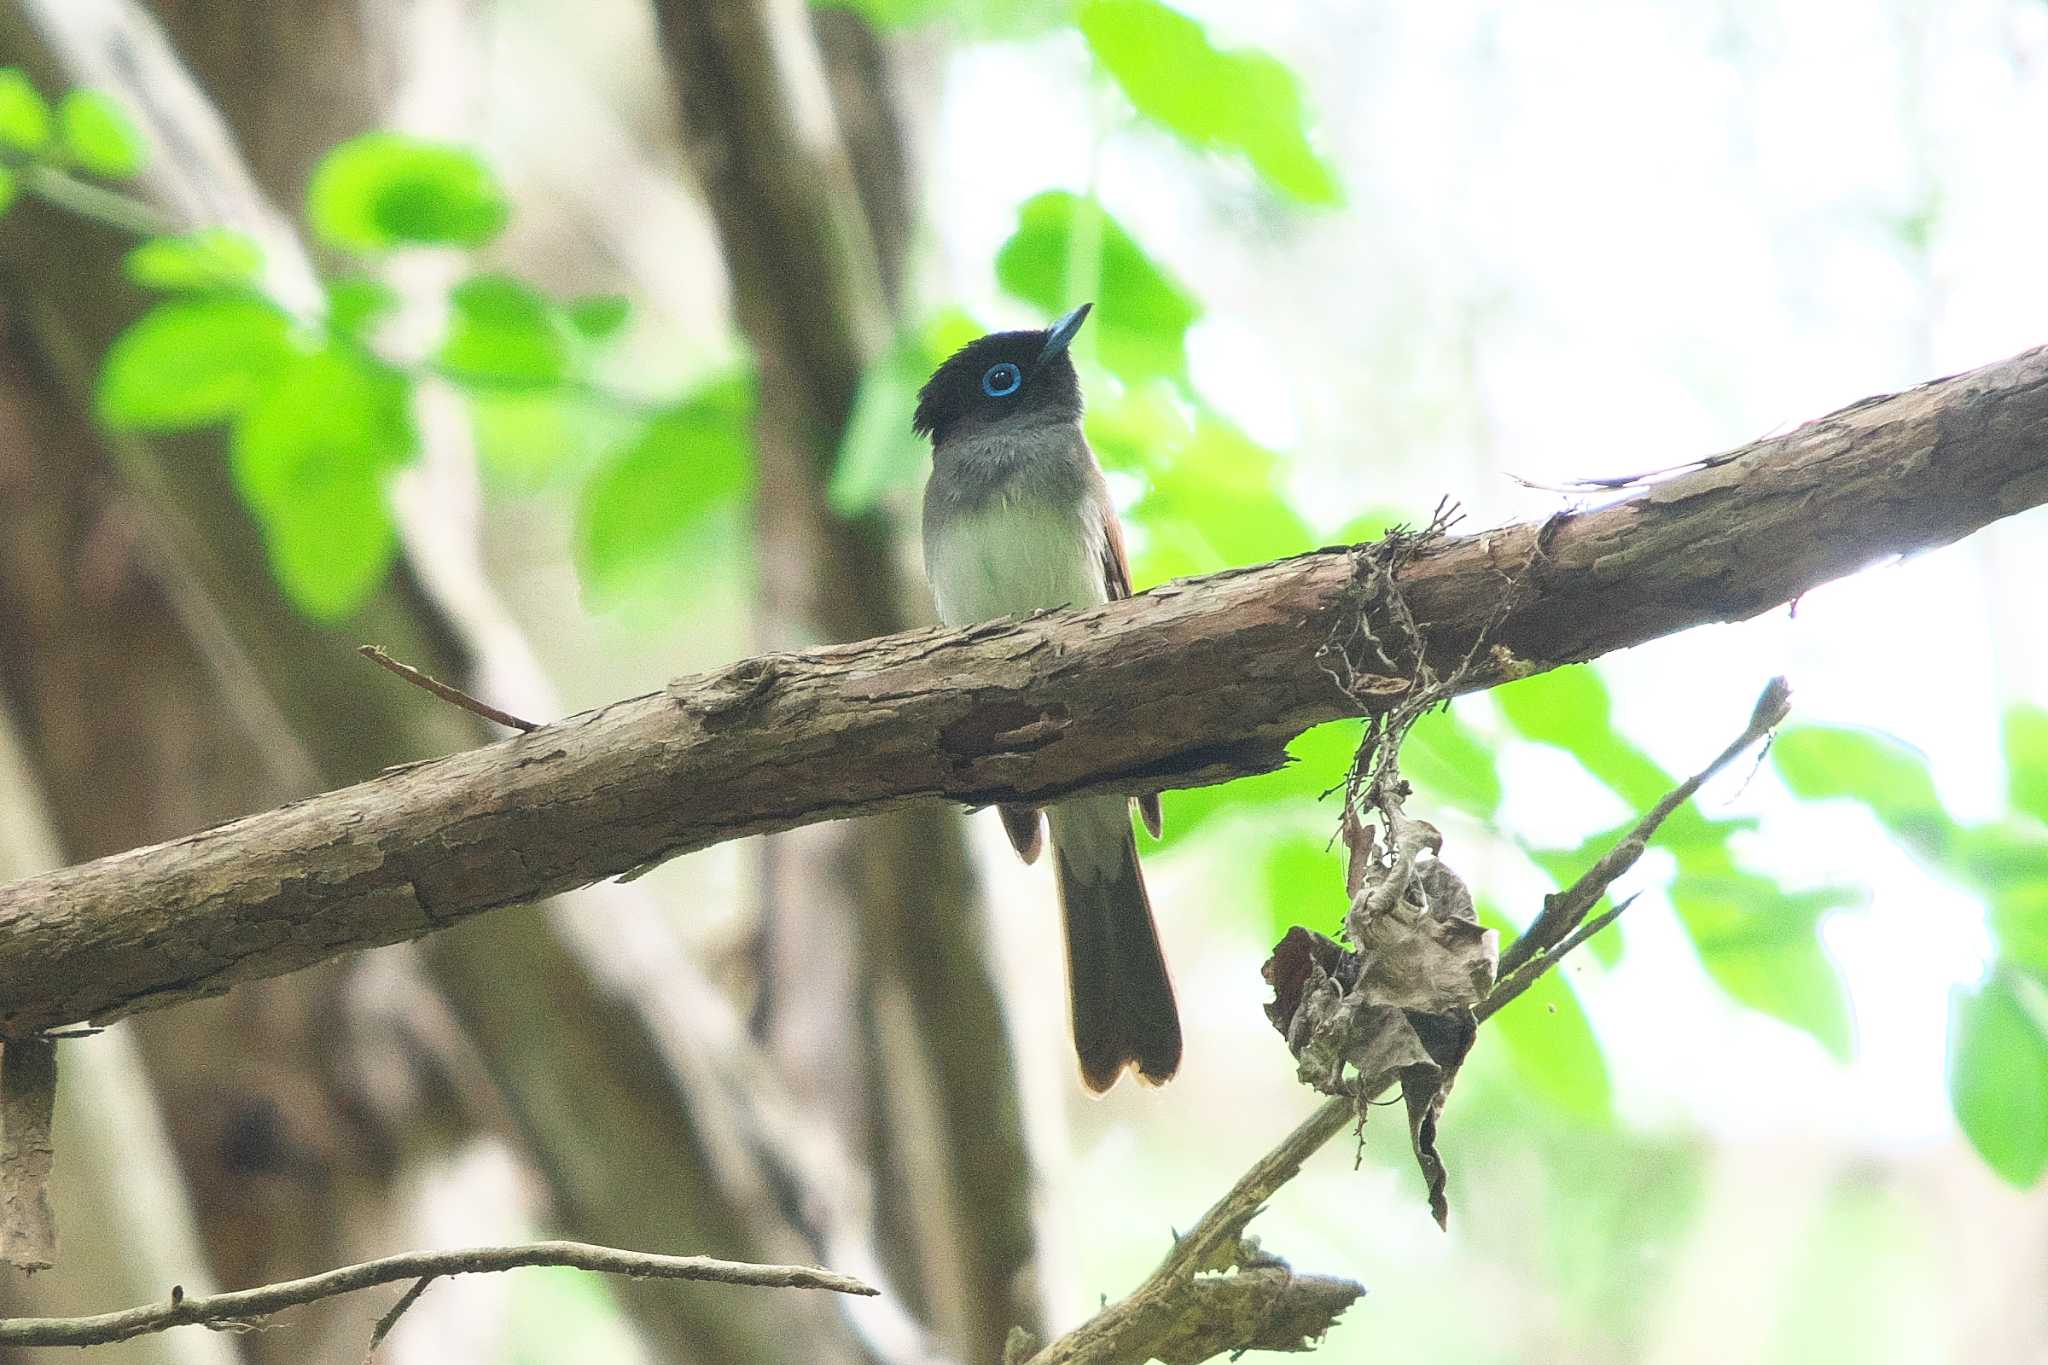 Photo of Black Paradise Flycatcher at 氷取沢市民の森 by Y. Watanabe